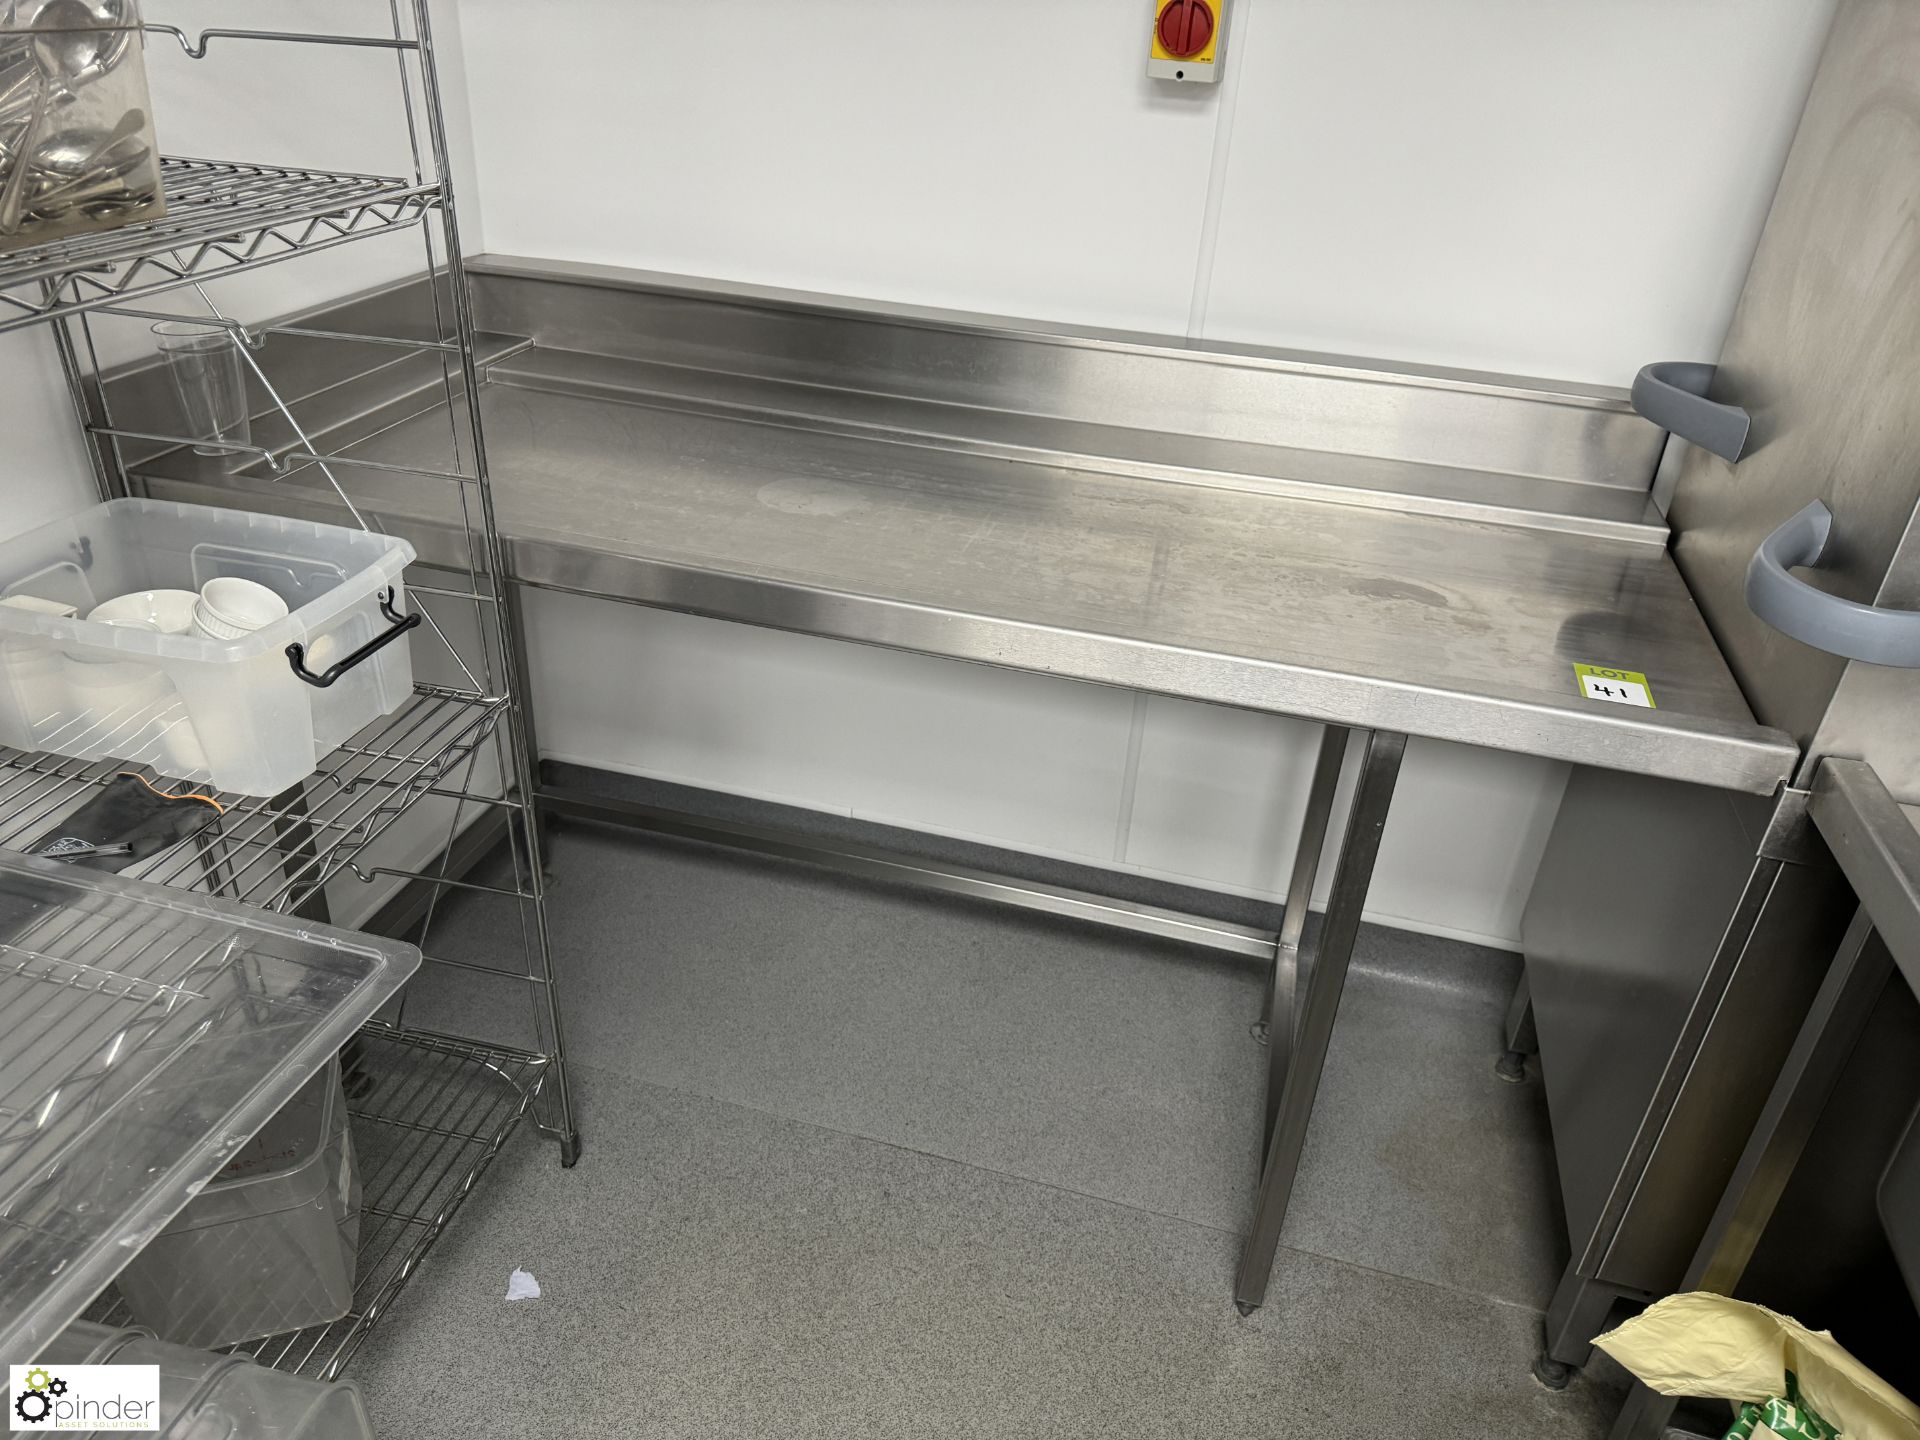 Commercial Dish Wash System, comprising Winterhalter stainless steel single tray dishwasher - Image 10 of 11